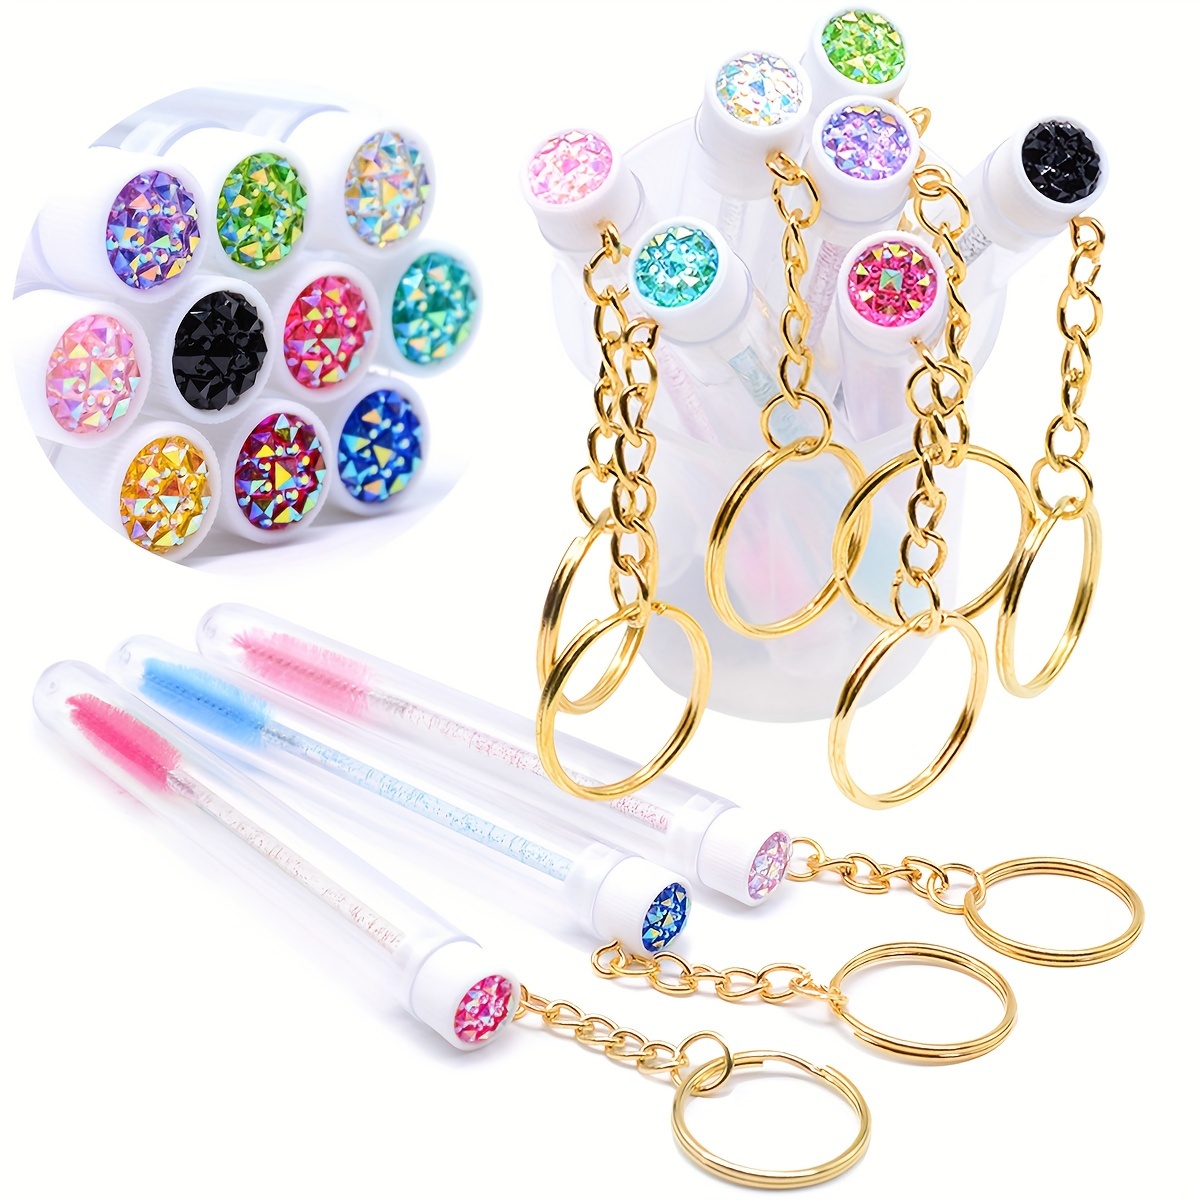 

2pcs Sparkling Eyelash Brushes In Dust-proof Container Tube With Keychain Rhinestone Glitter Eye Lash Mascara Wands Crystal Eyebrow Spoolies Combs Micro Makeup Tools